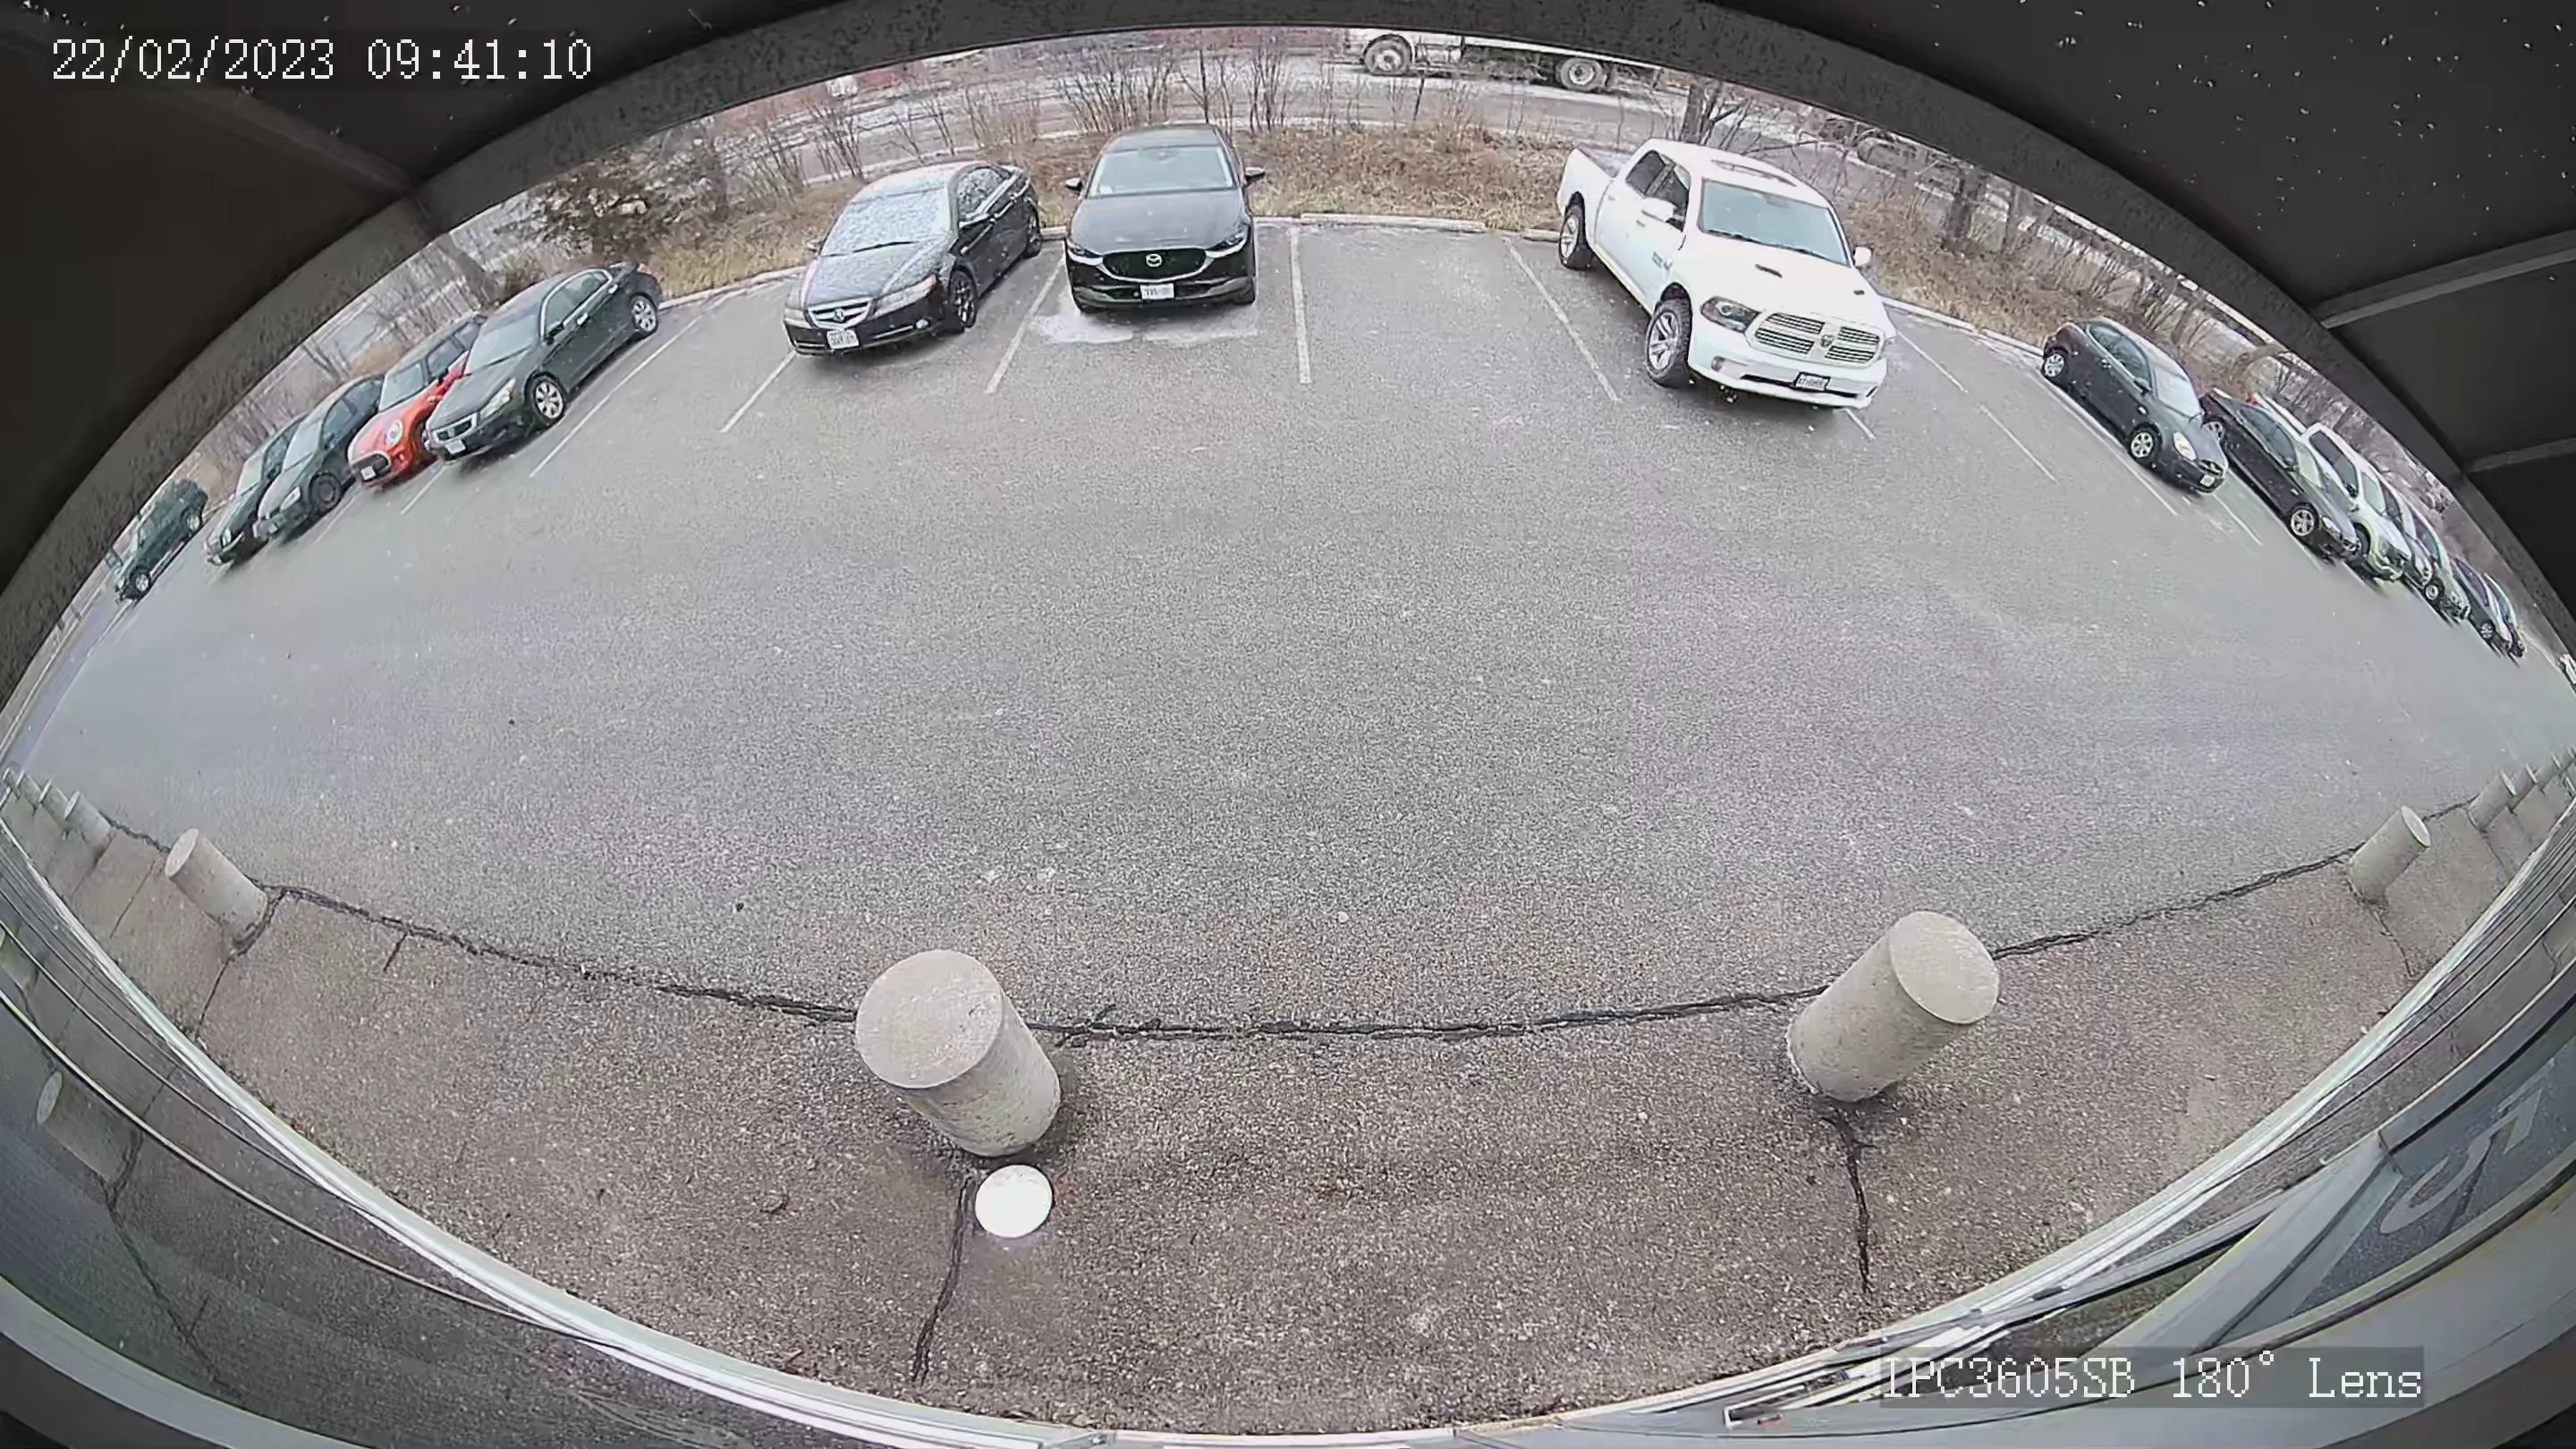 Uniview 180° wide angle camera snapshot of a parking lot during daytime